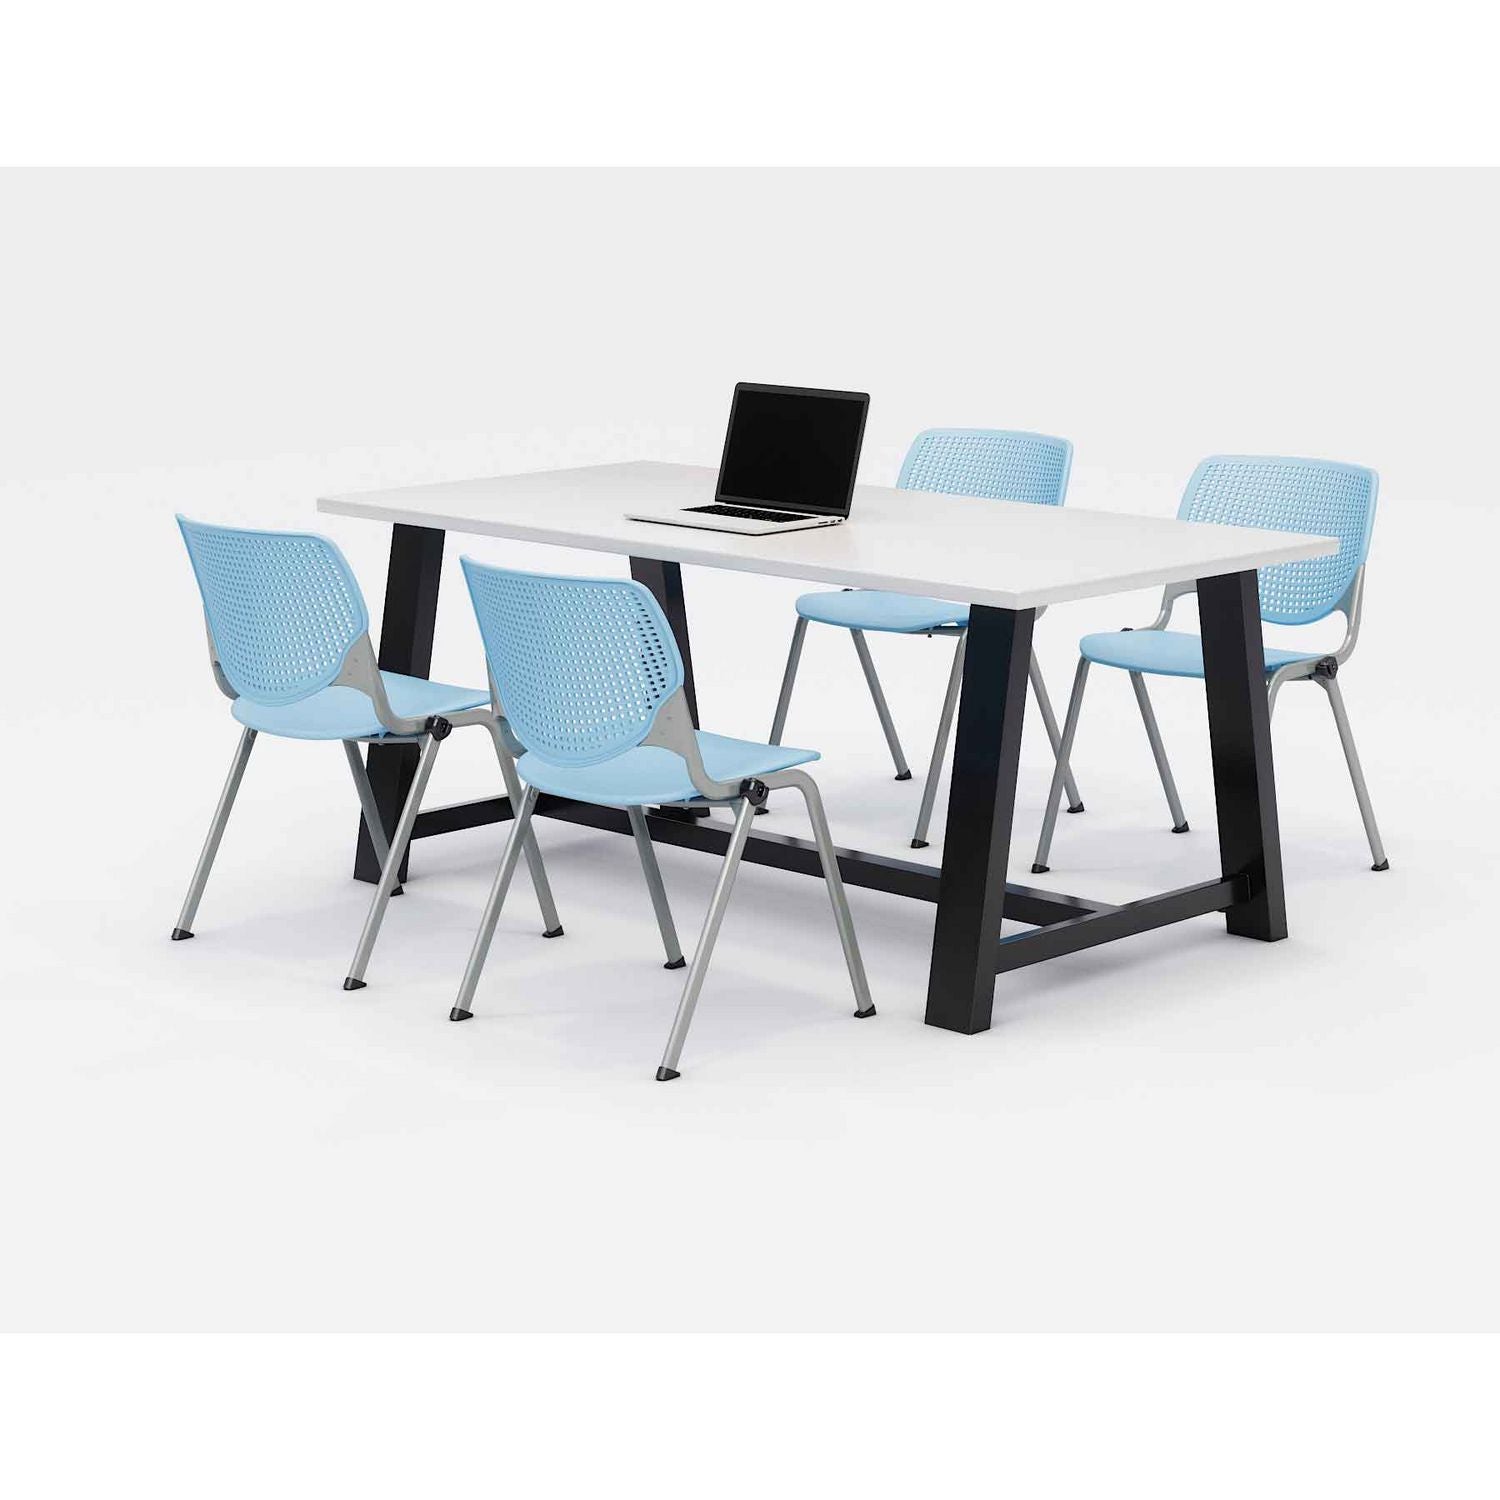 midtown-dining-table-with-four-sky-blue-kool-series-chairs-36-x-72-x-30-designer-white-ships-in-4-6-business-days_kfi840031900333 - 1